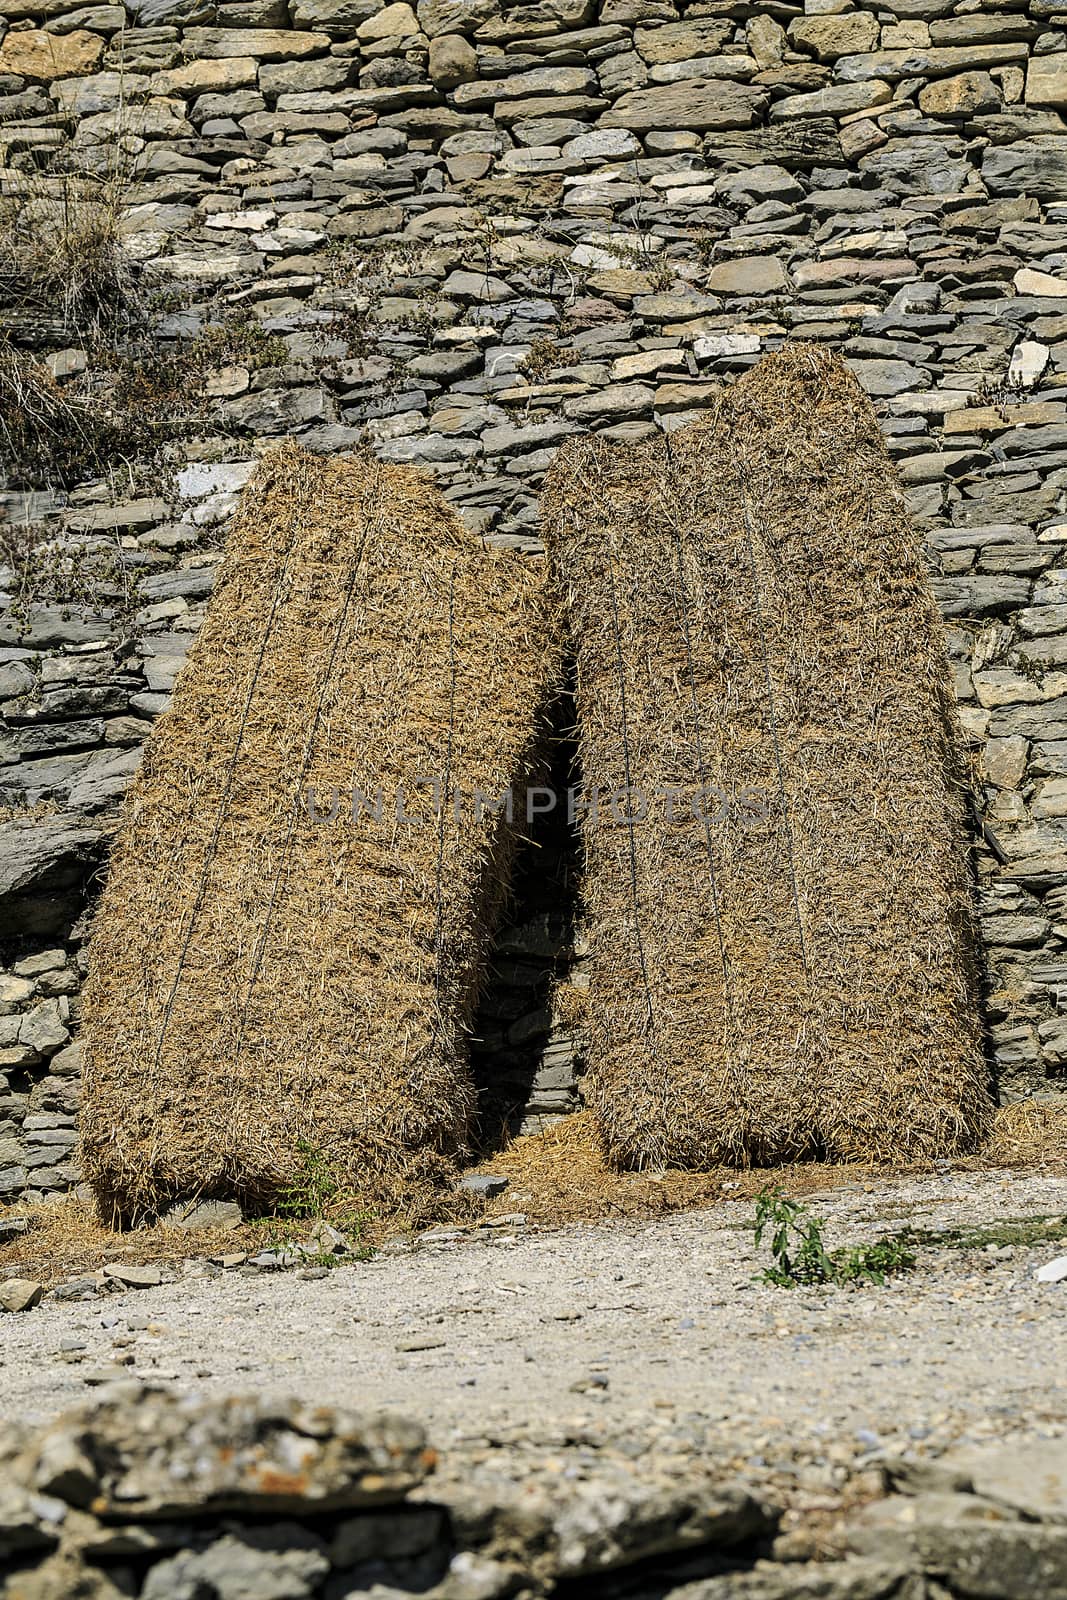 straw in a wall of stones